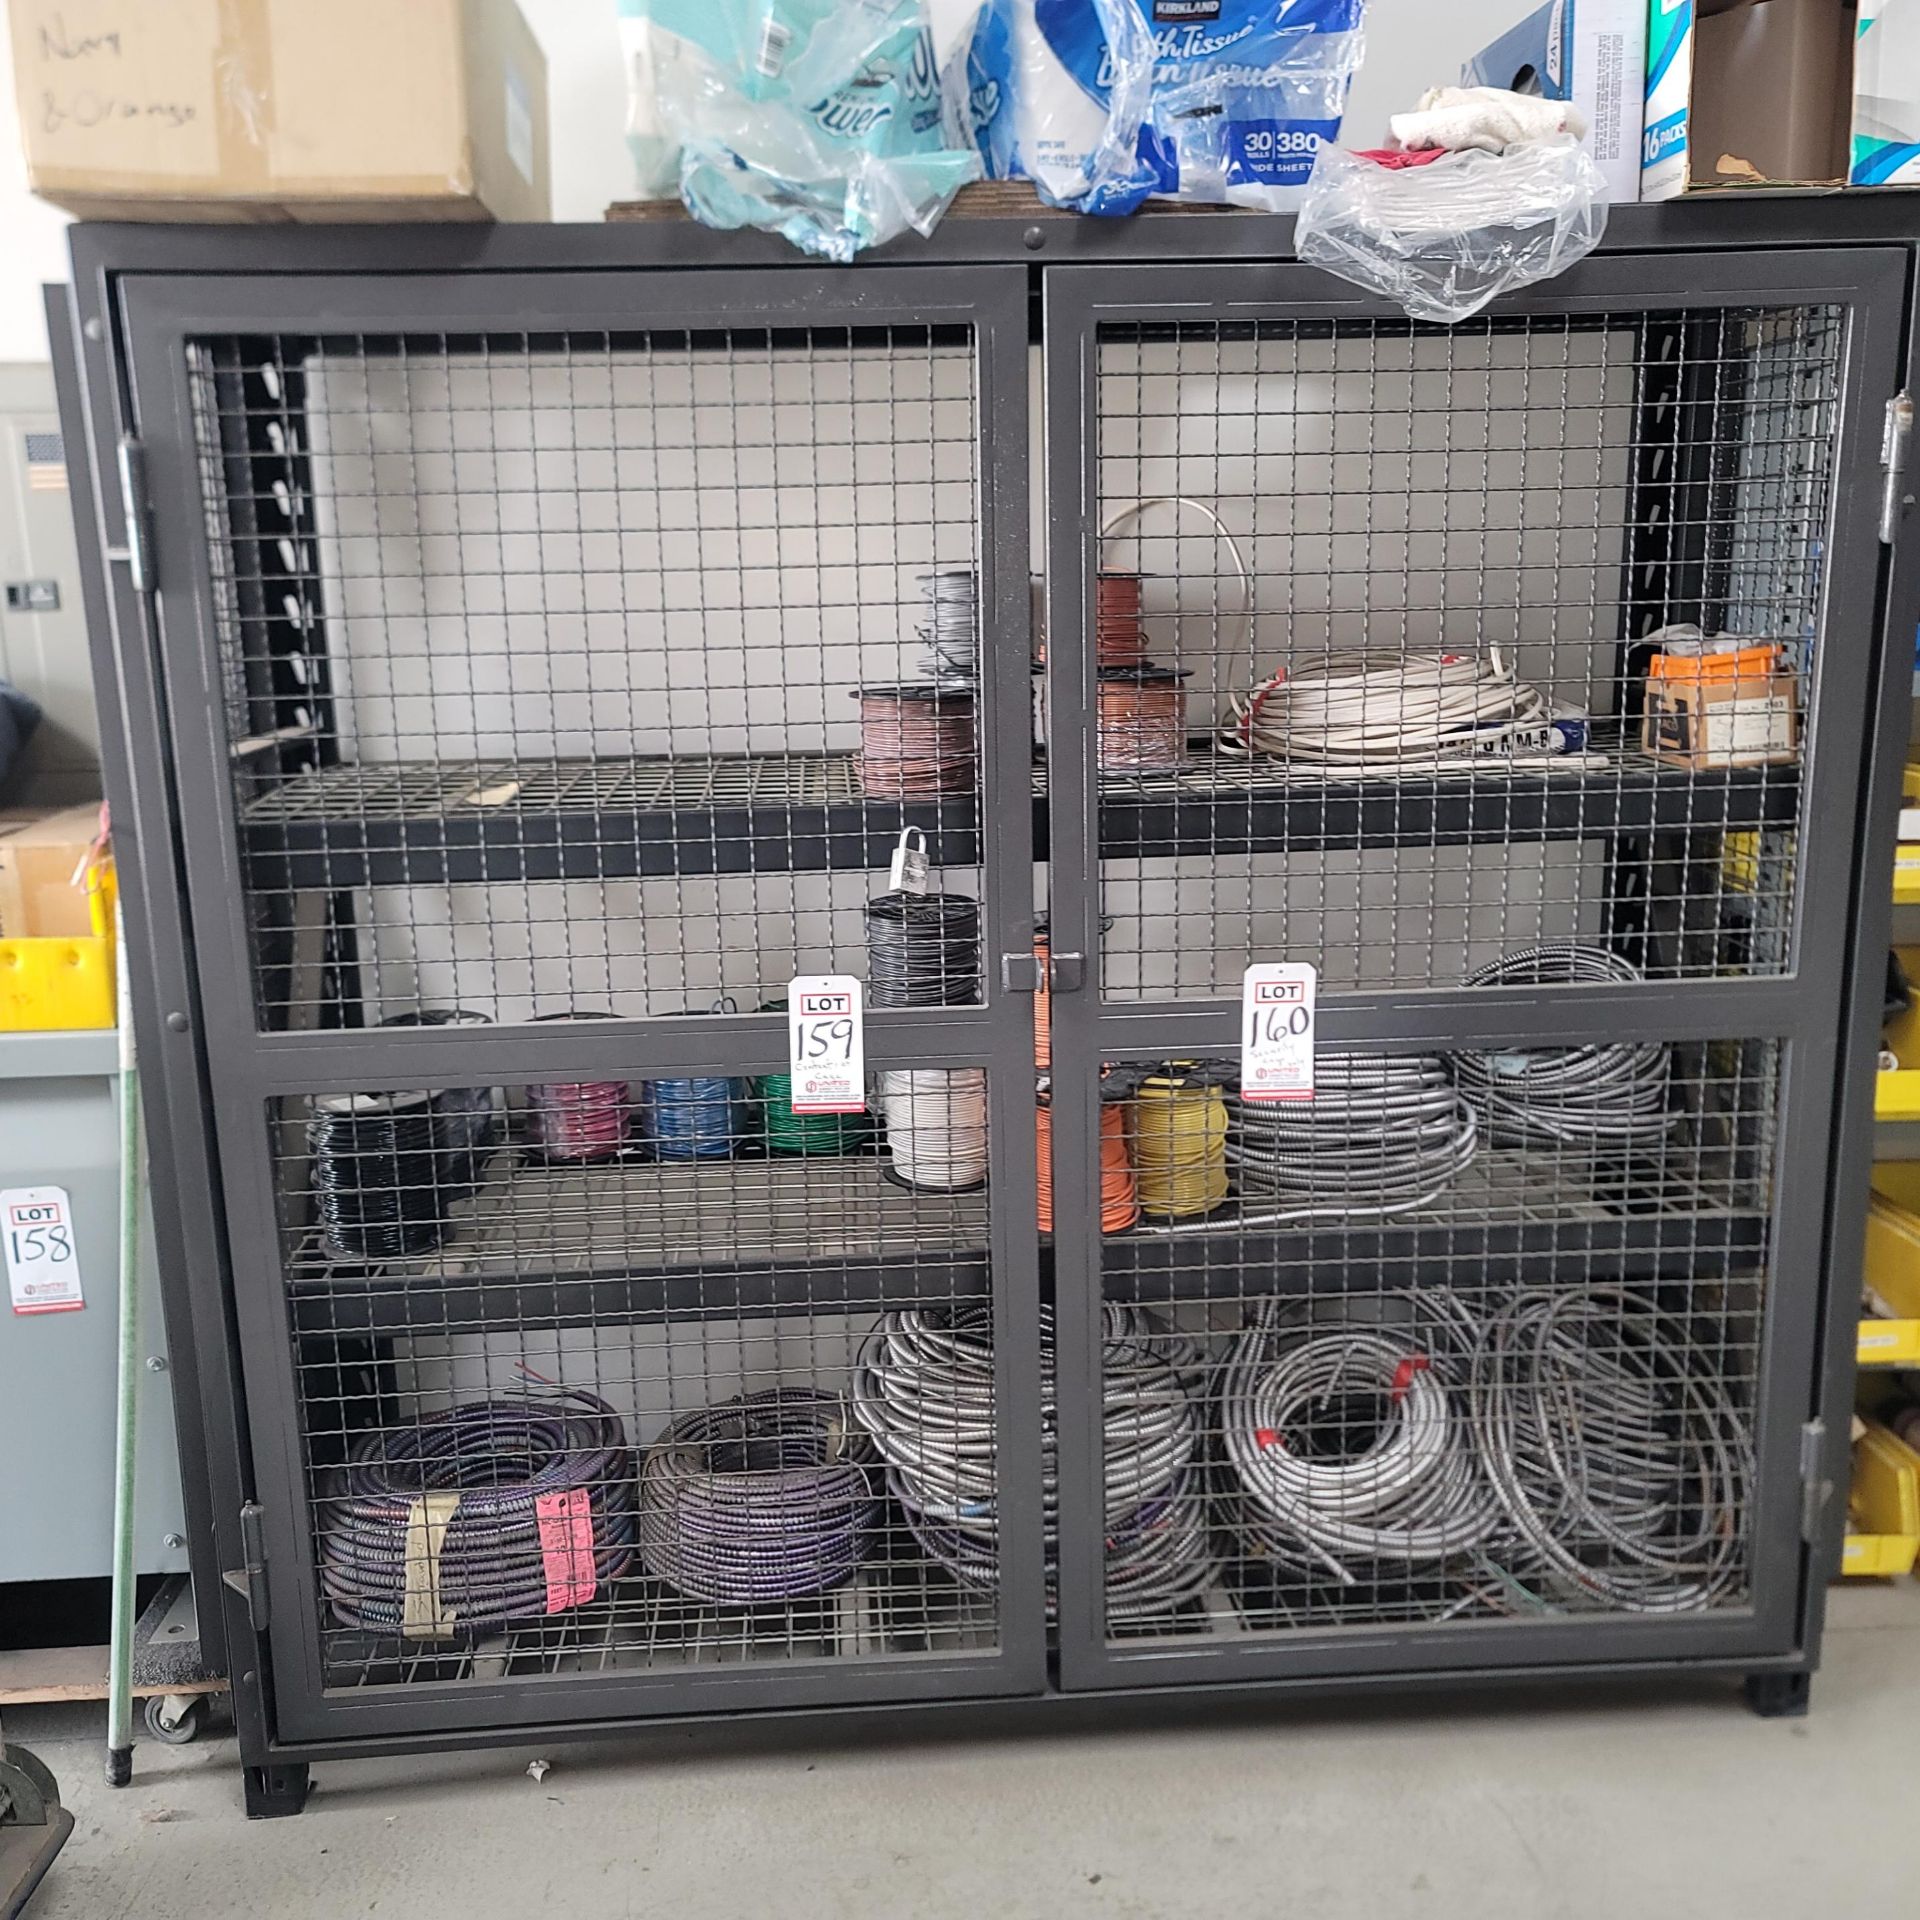 SECURITY STORAGE CAGE, 79" X 26" X 6', CONTENTS NOT INCLUDED, (DELAYED PICKUP UNTIL TUESDAY, APRIL